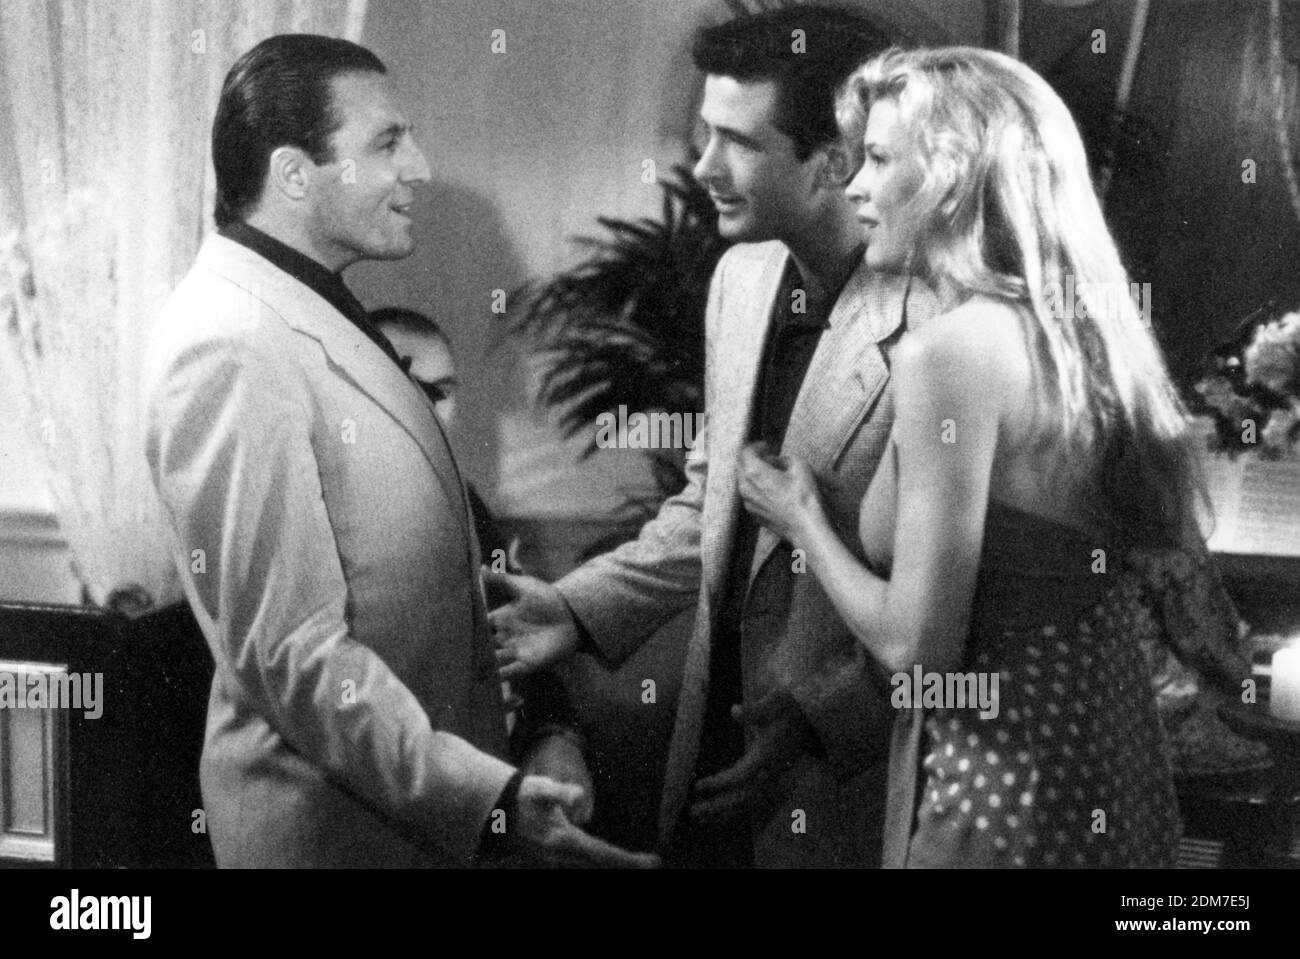 Los Angeles.CA.USA. Armand Assante, Kim Basinger and Alec Baldwin    in ©Hollywood Pictures film, The Marrying Man (1991)  Director: Jerry Rees Writer:  Neil Simon Source: Rudyard KiplingÕs poem with same title Note: Also known as Too Hot to Handle in the UK and Australia Ref:LMK106-SLIB181120-003 Supplied by LMKMEDIA. Editorial Only. Landmark Media is not the copyright owner of these Film or TV stills but provides a service only for recognised Media outlets. pictures@lmkmedia.com Stock Photo